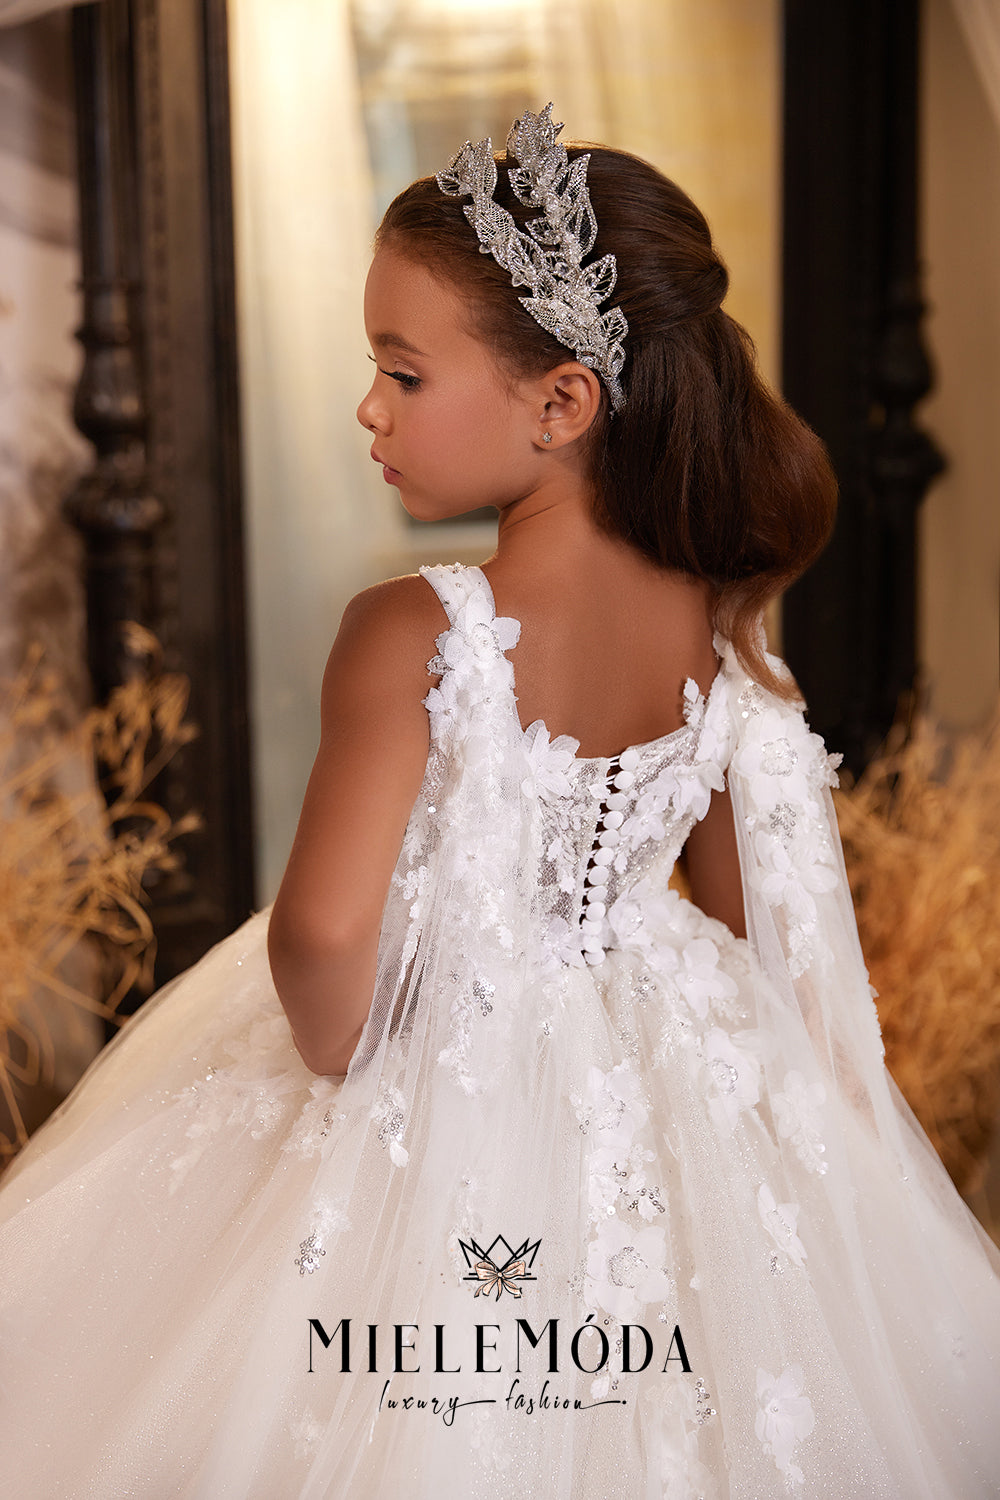 First Communion Flower Girl Crystal Leaves Luxury Hair Accessory